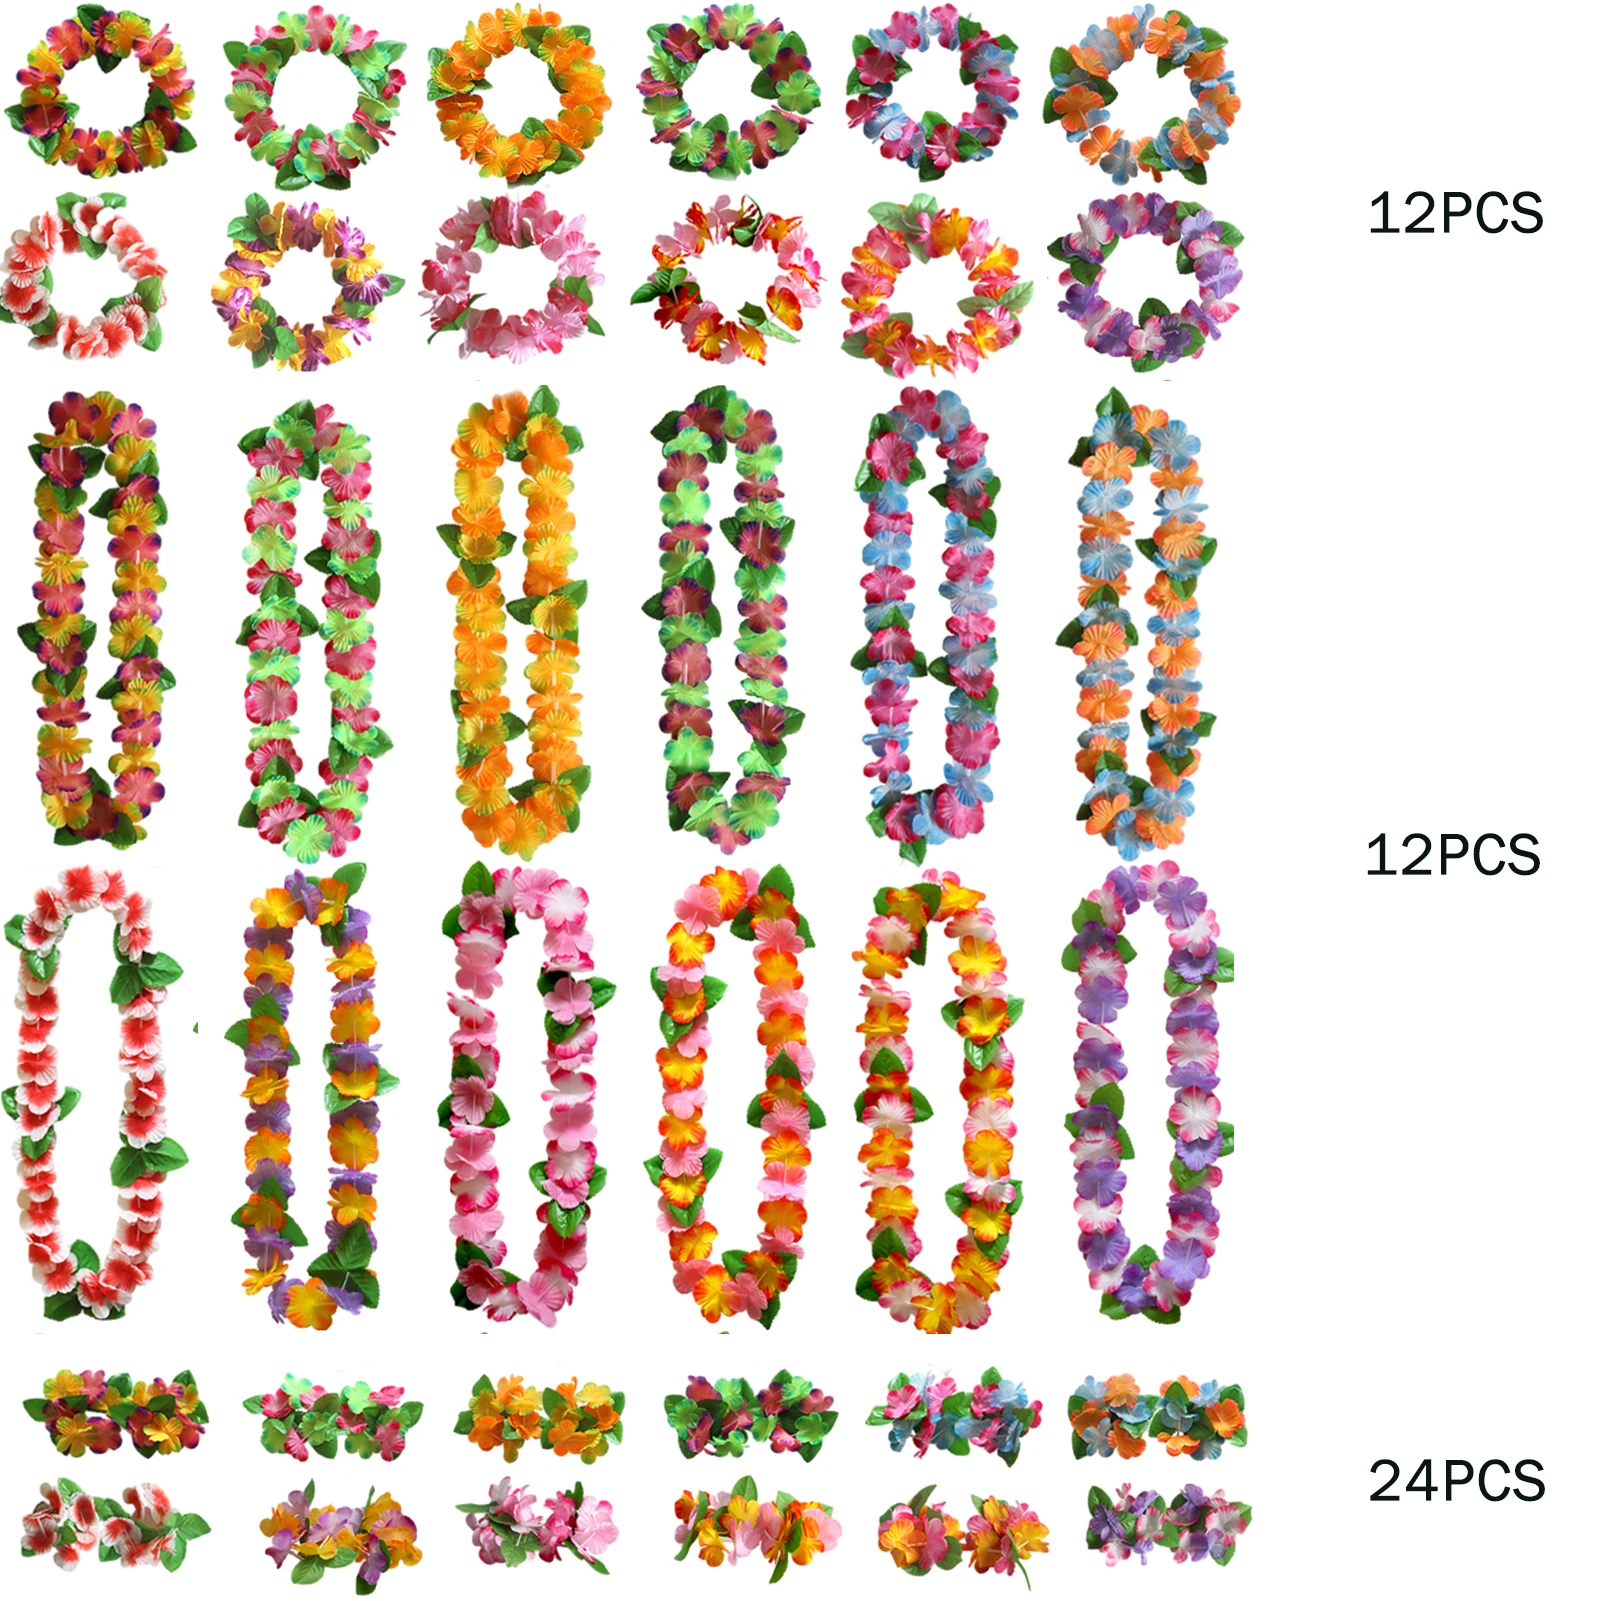 

48pcs Hawaiian Lei Garlands Tropical Chains Fancy Artificial Party Decorations Beach Headband Garland Necklace Cloth Holiday